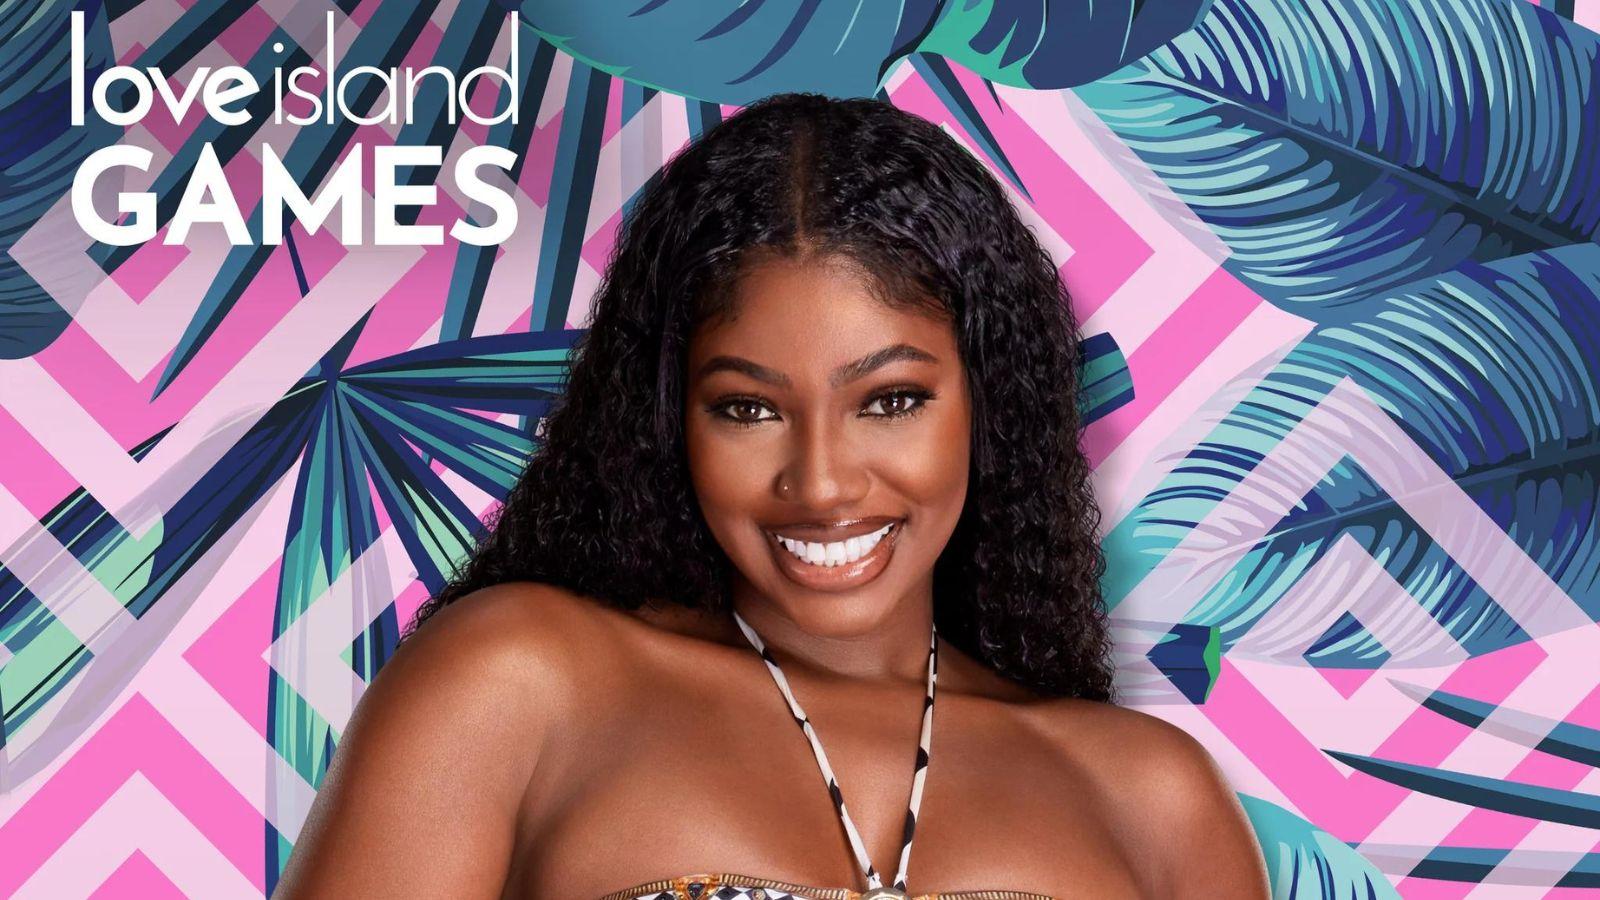 Imani from Love Island Games